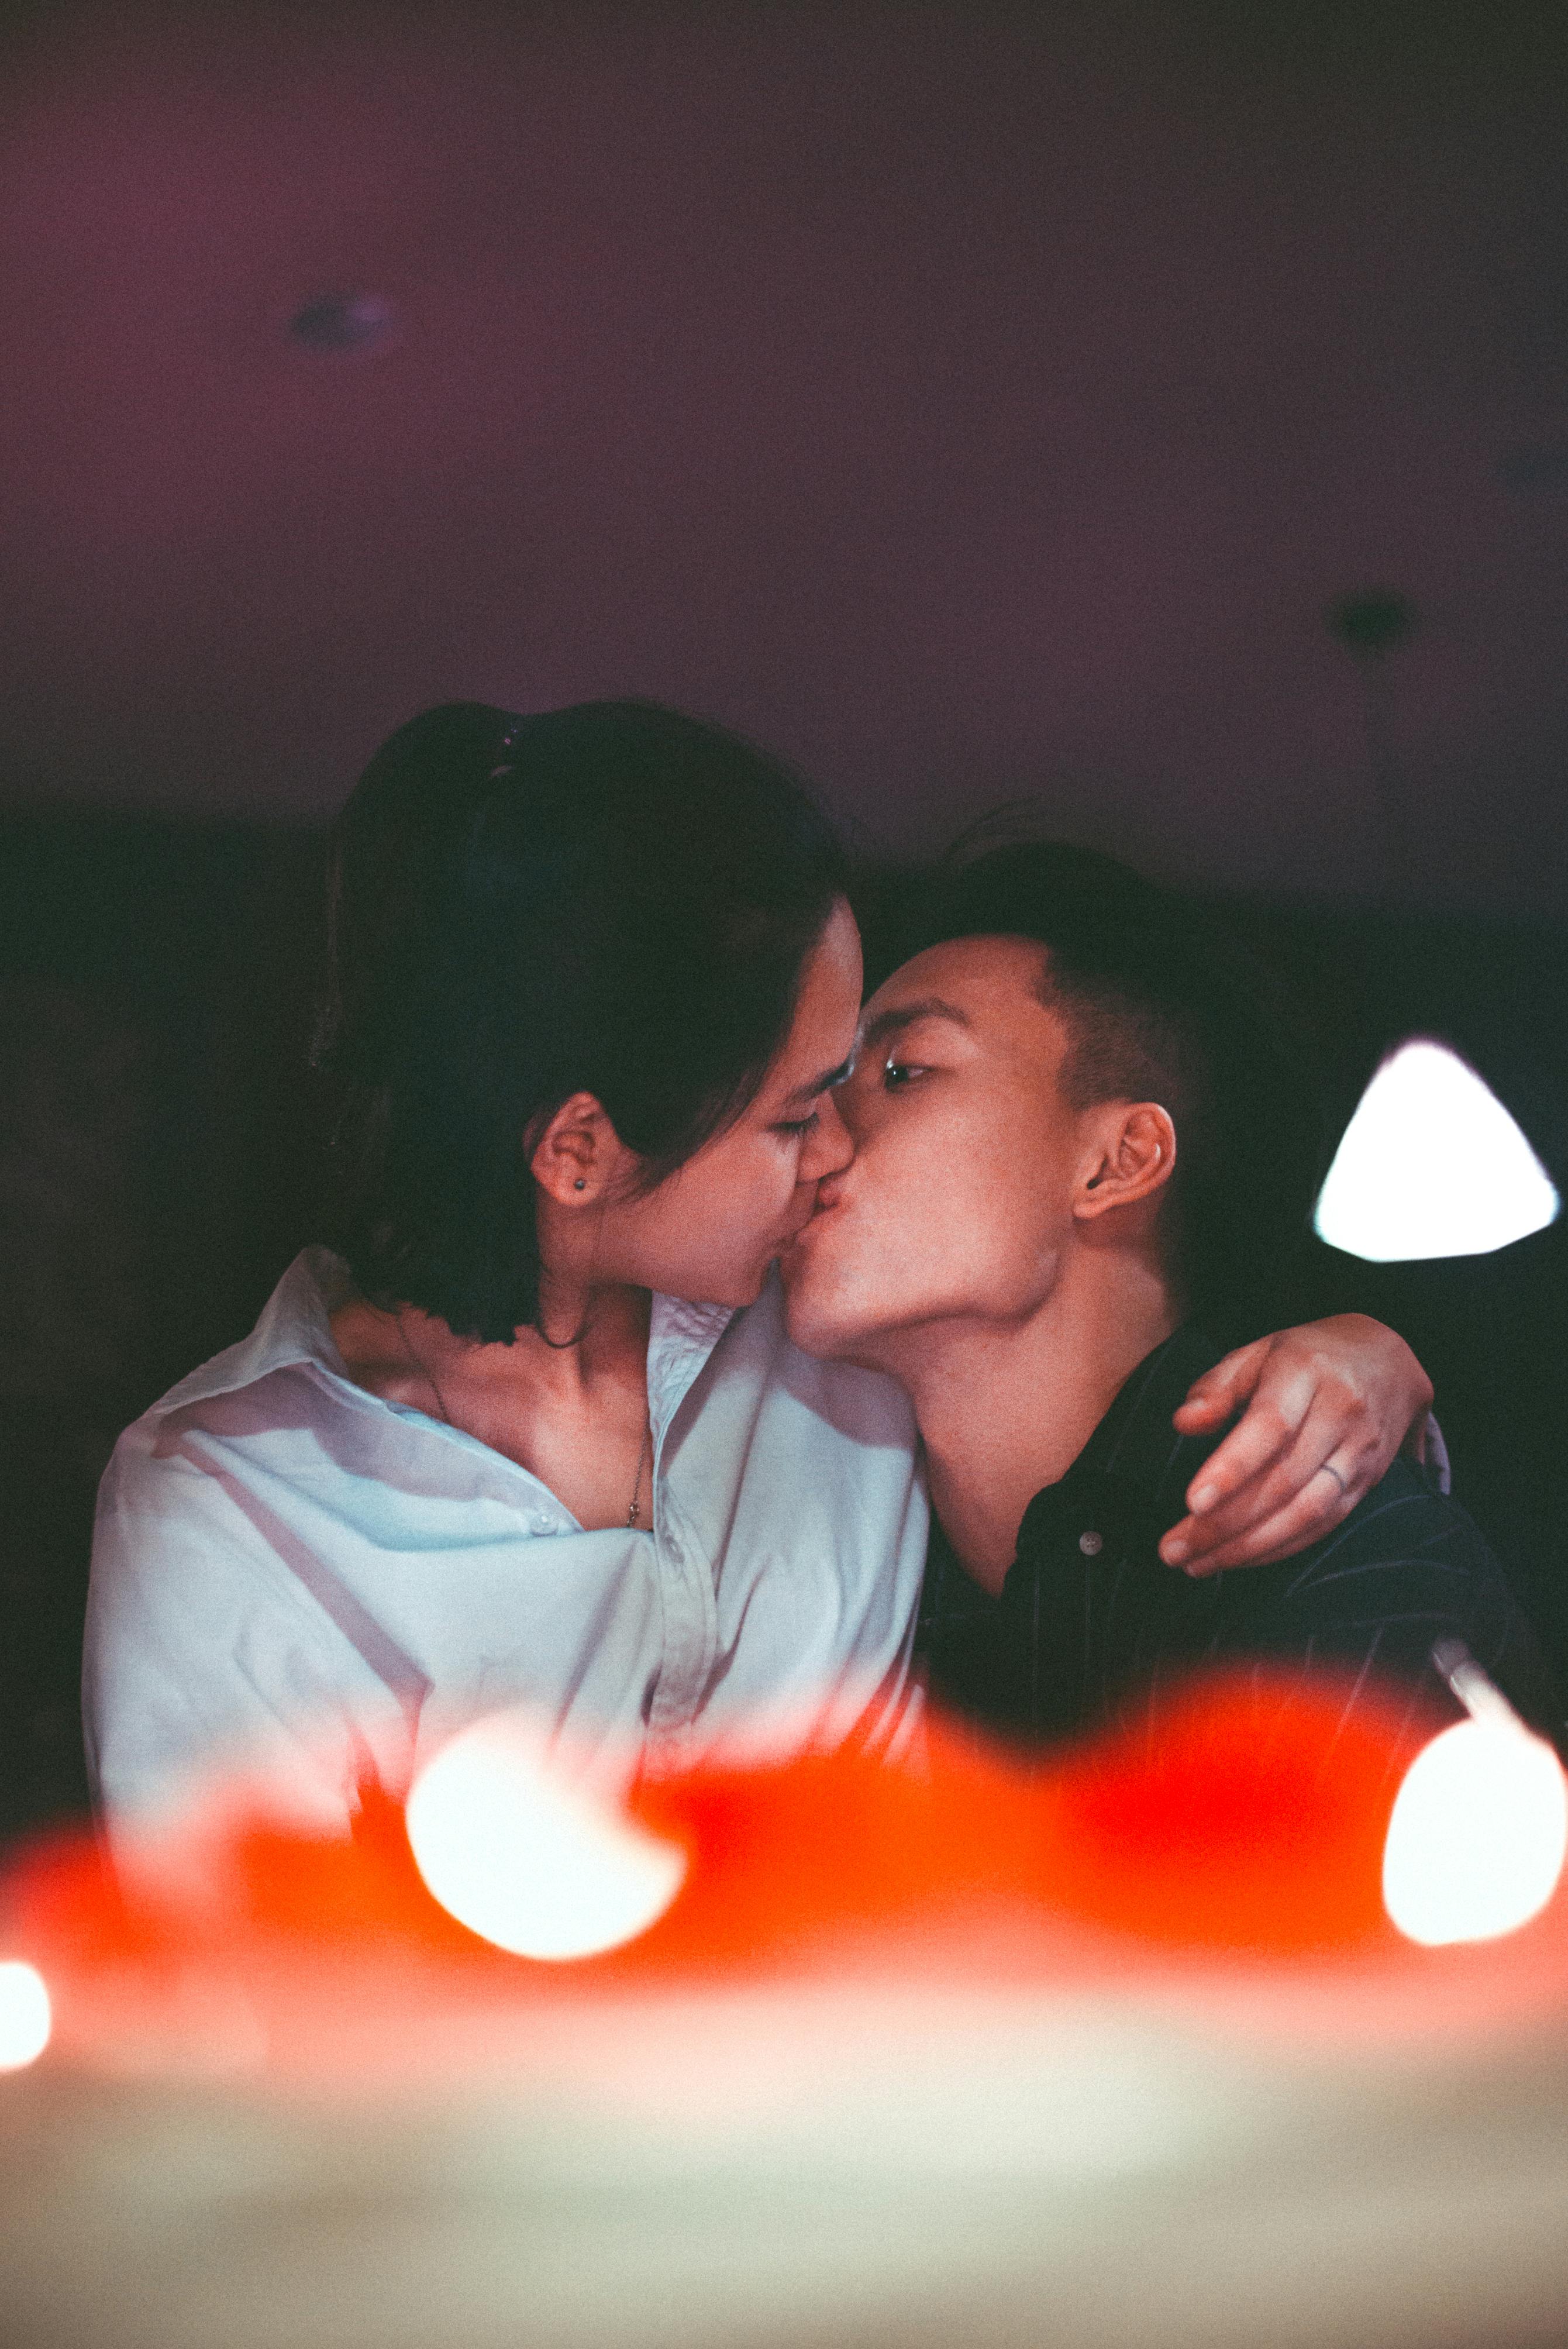 5,000+ Best Kiss Images · 100% Free Download · Pexels Stock Photos